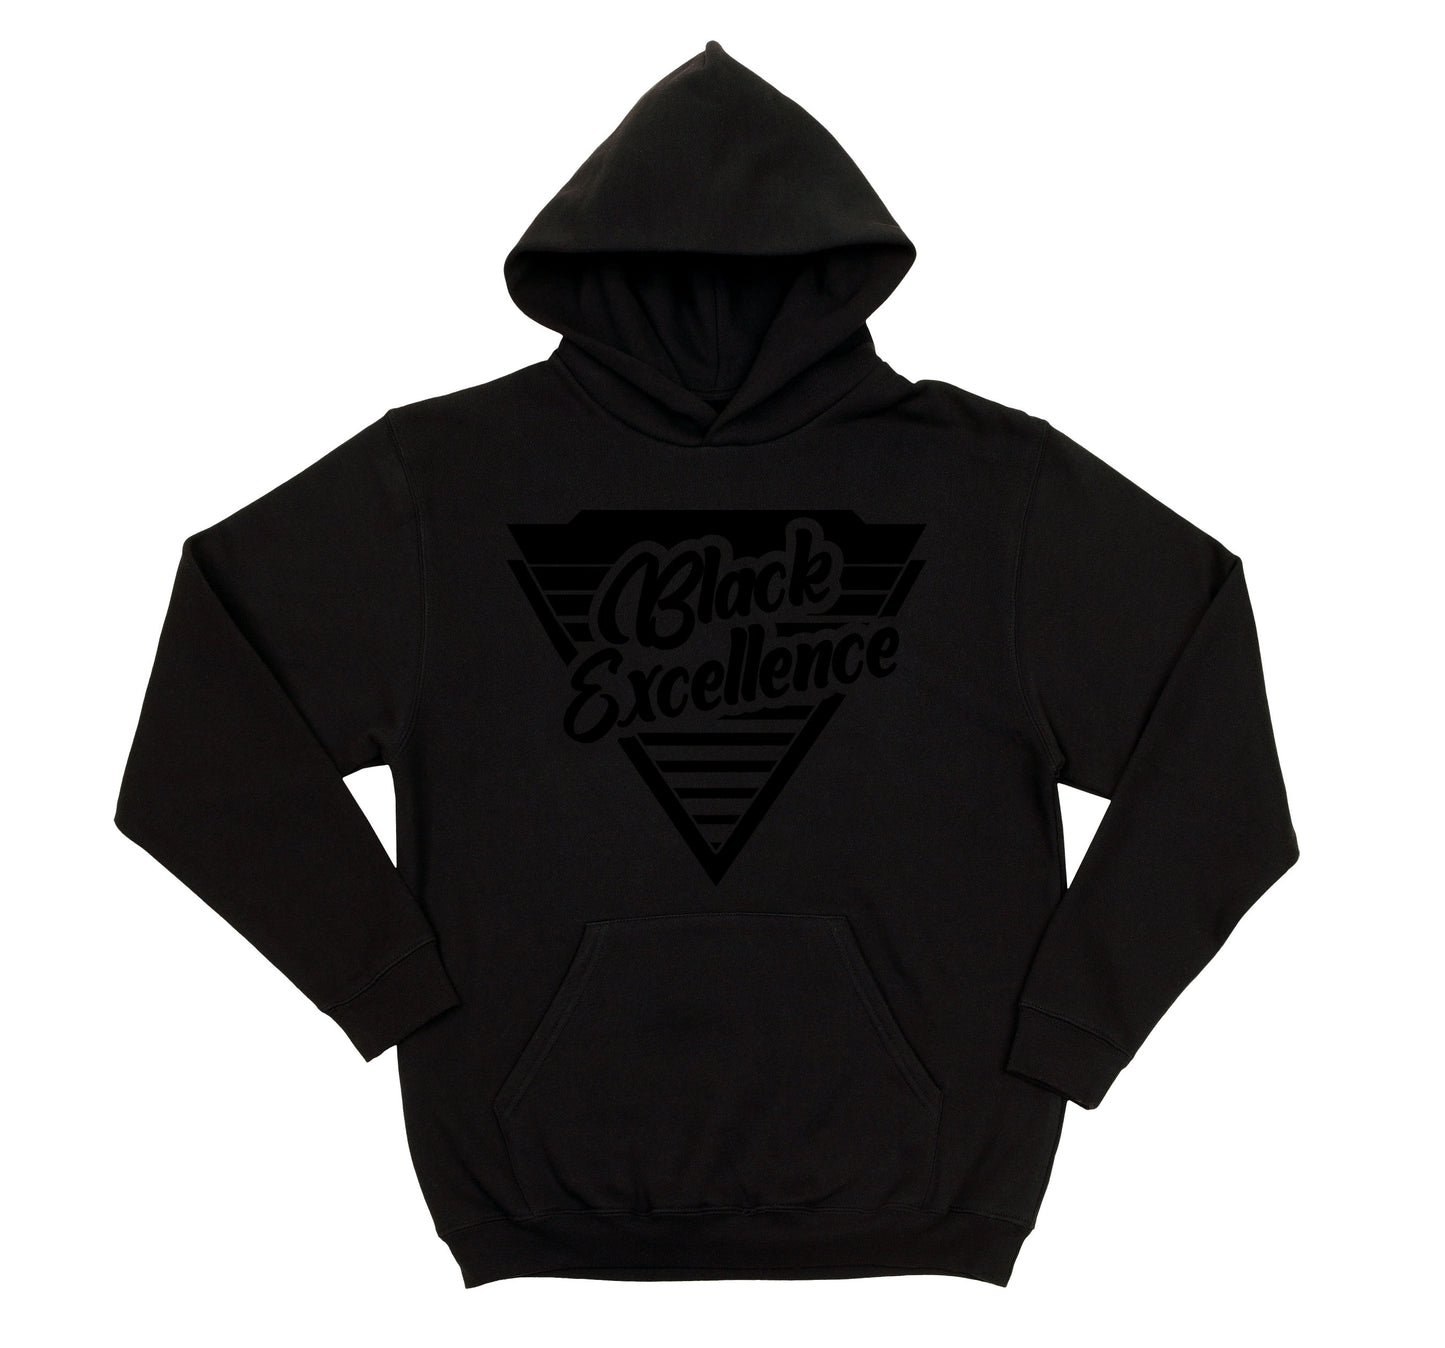 Blackout Black Excellence Hoodie